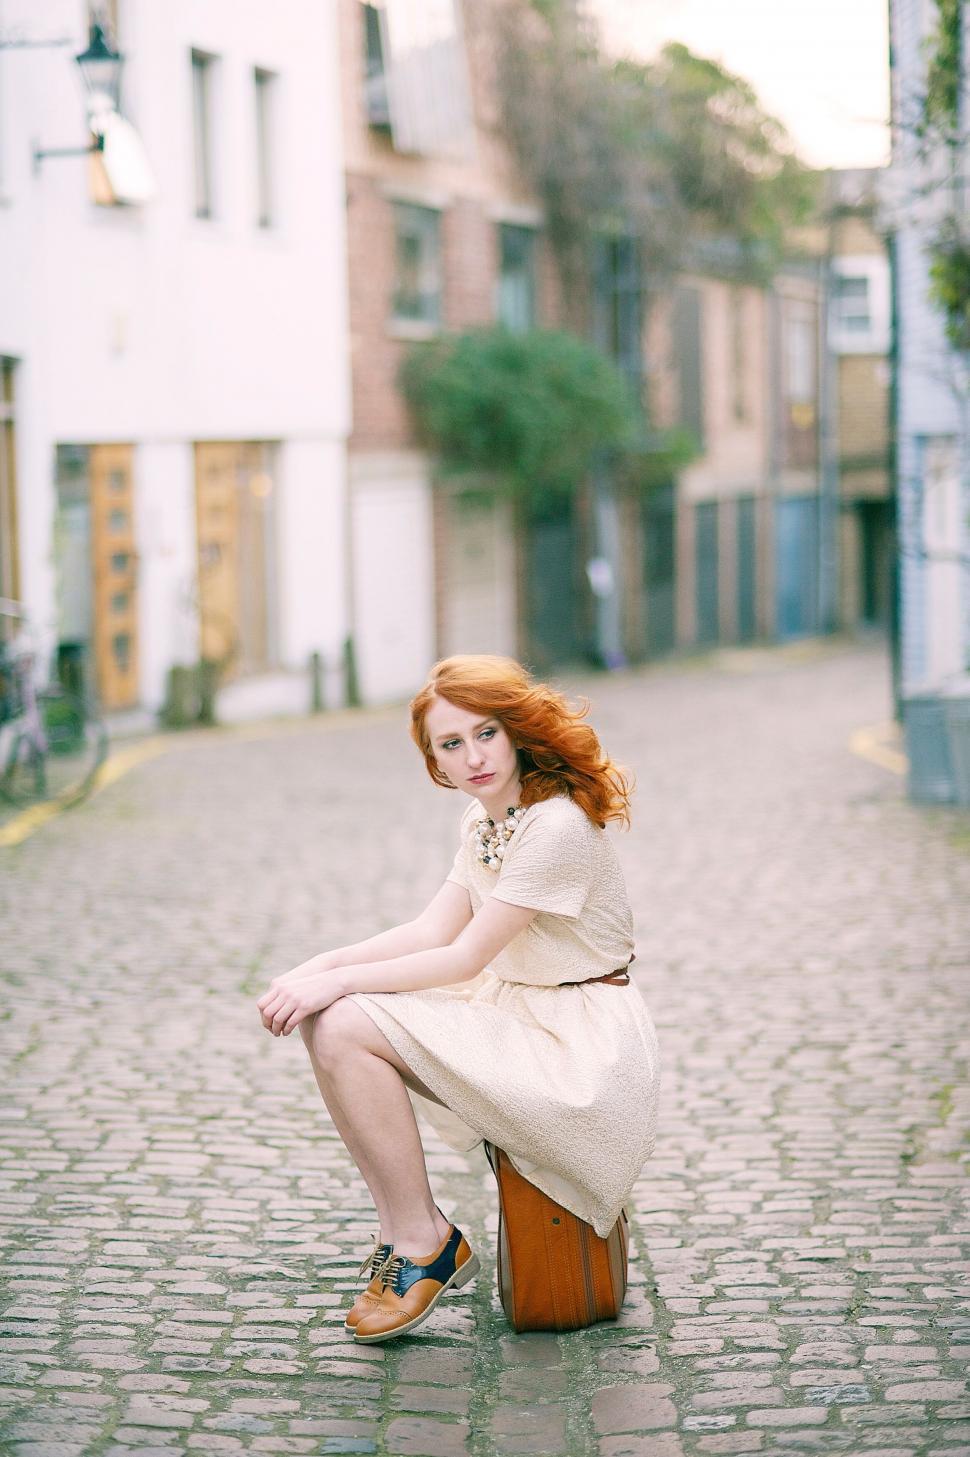 Free Image of Redhead sitting on suitcase in alley 